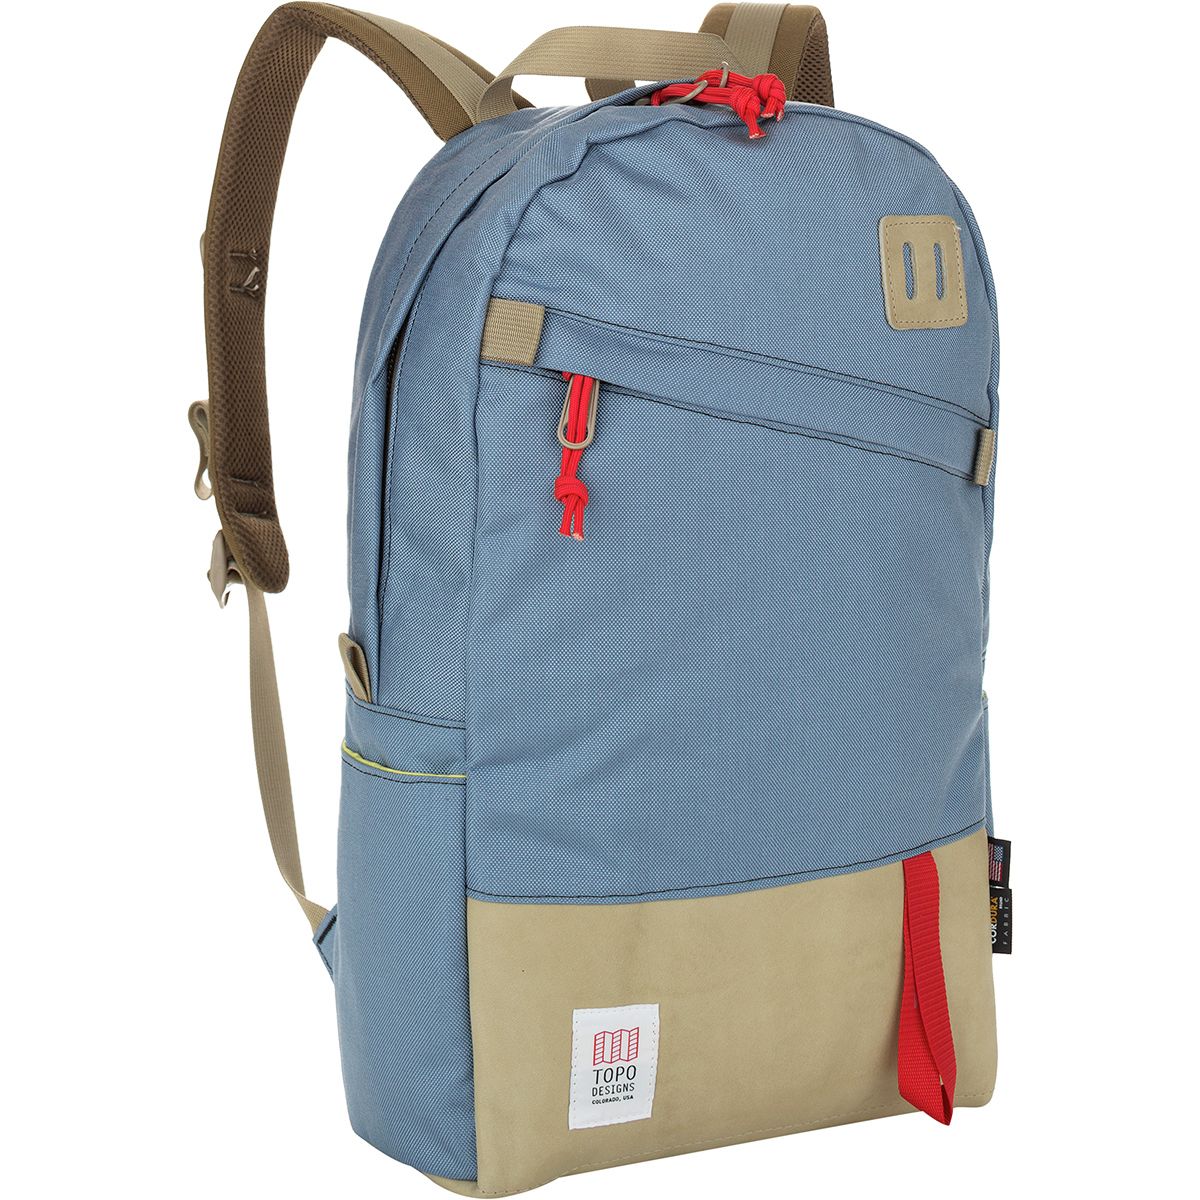 Topo Designs Daypack 20L Backpack | Backcountry.com